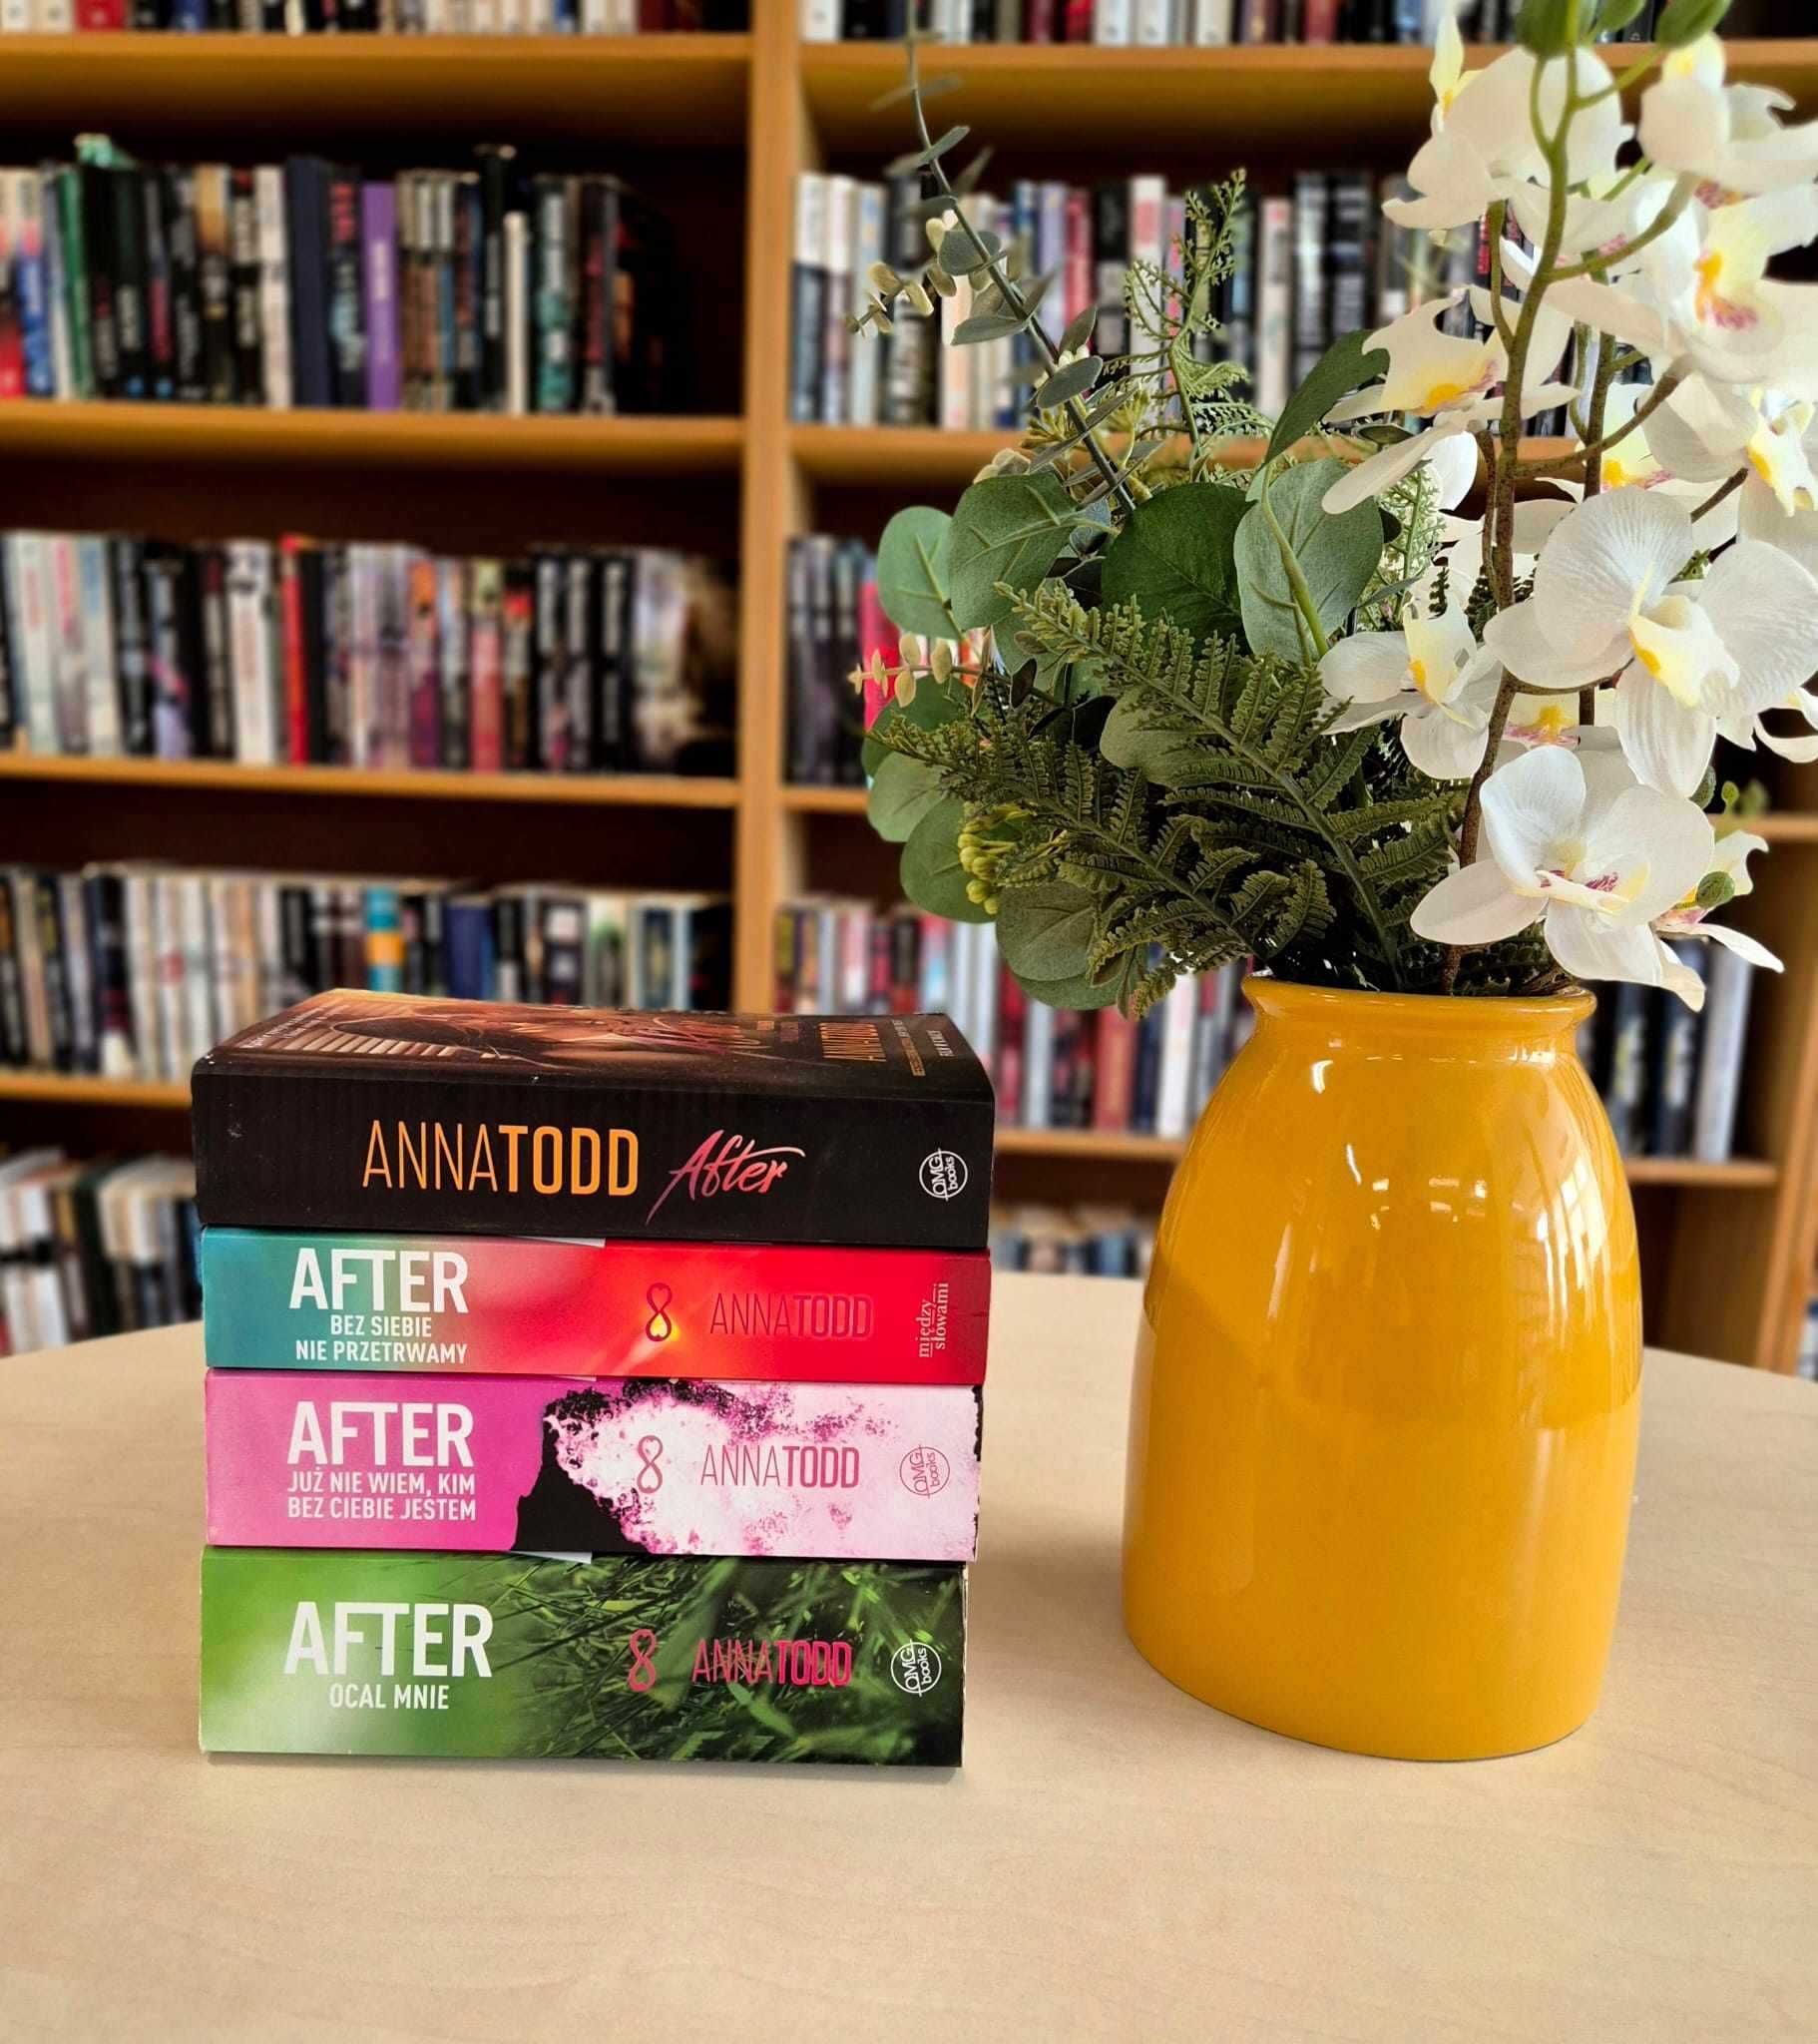 After, Anna Todd, 4 tomy